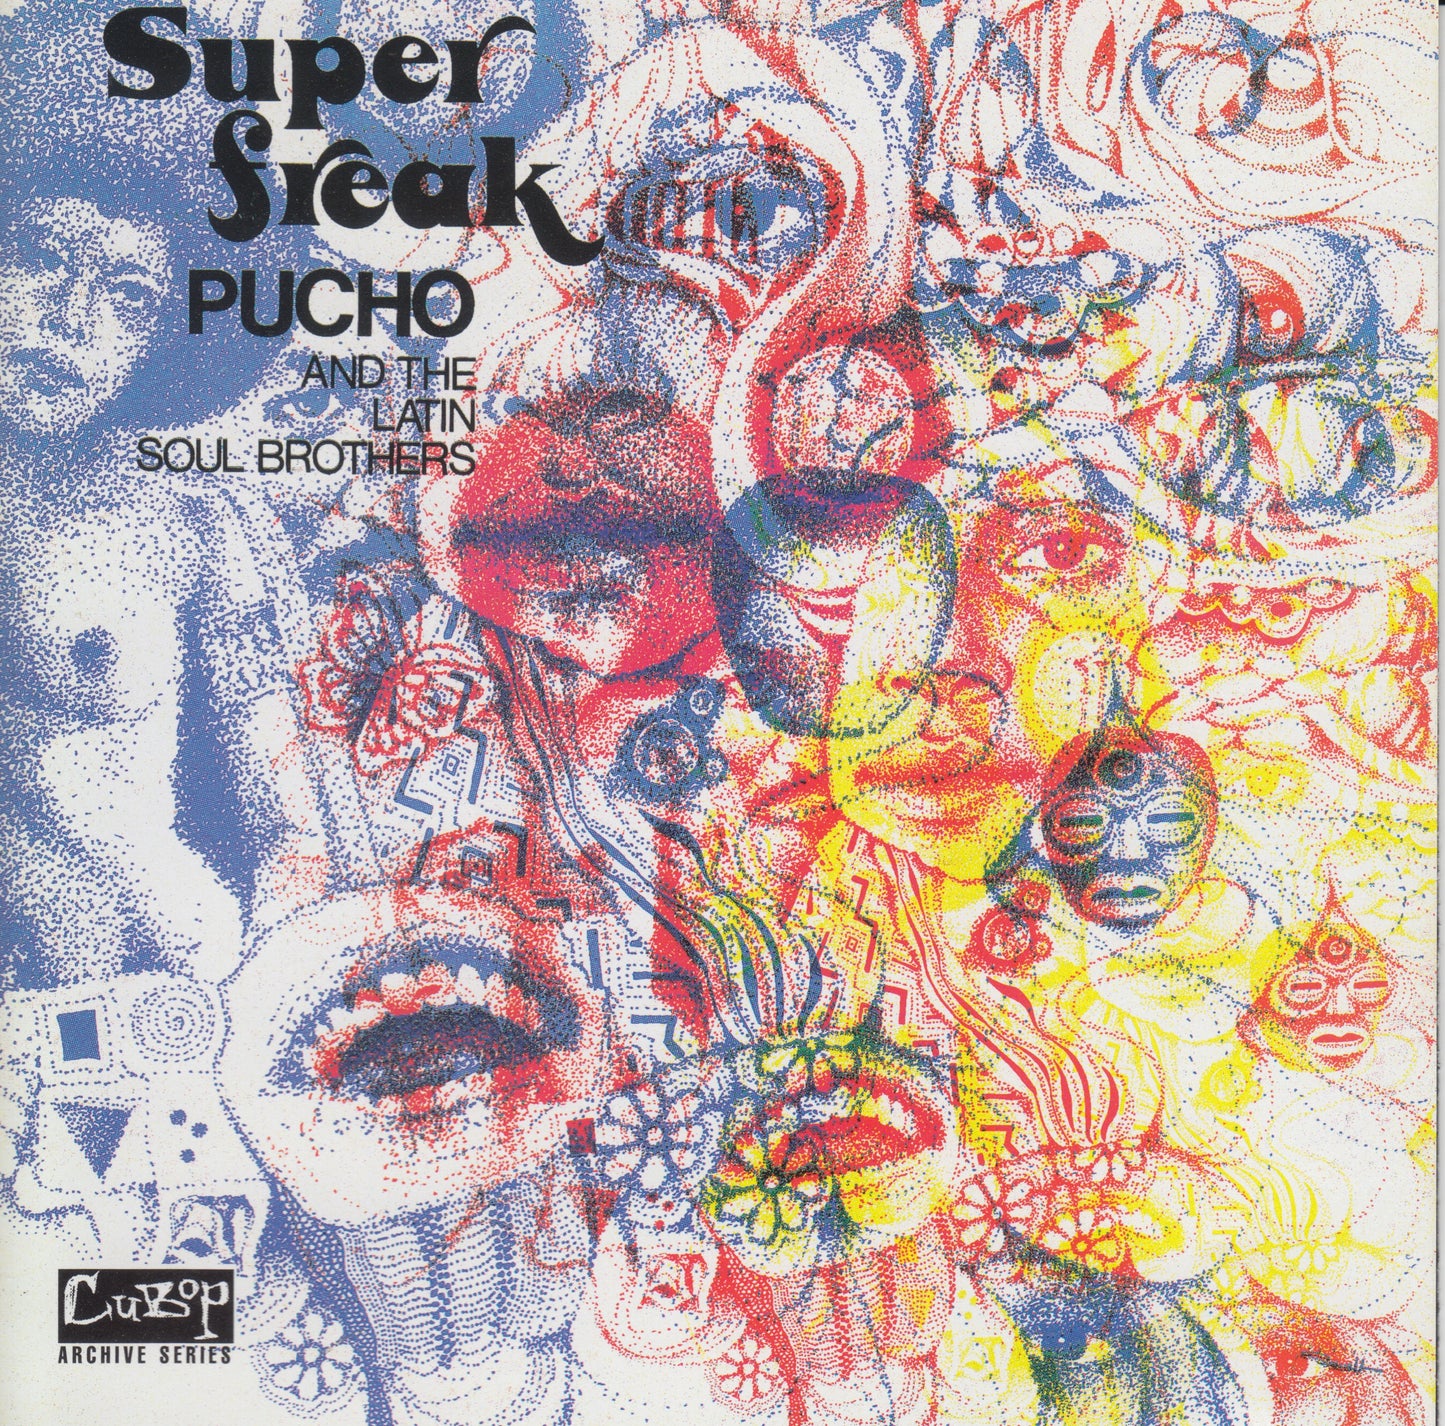 Pucho and His Latin Soul Brothers "Super Freak" LP